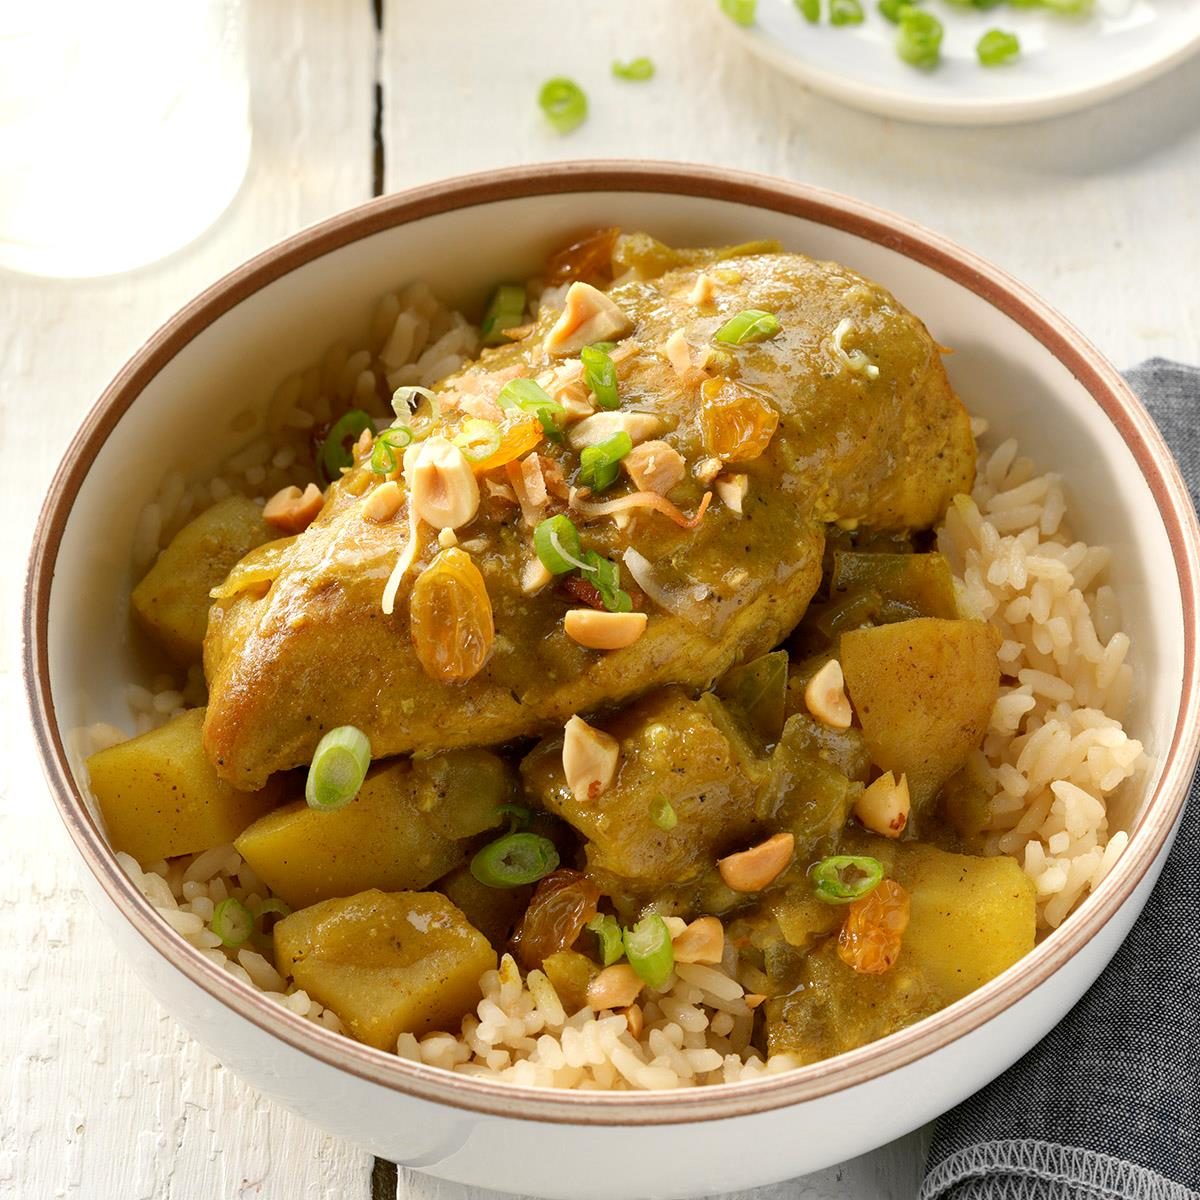 Monday: Slow-Cooker Coconut Curry Chicken